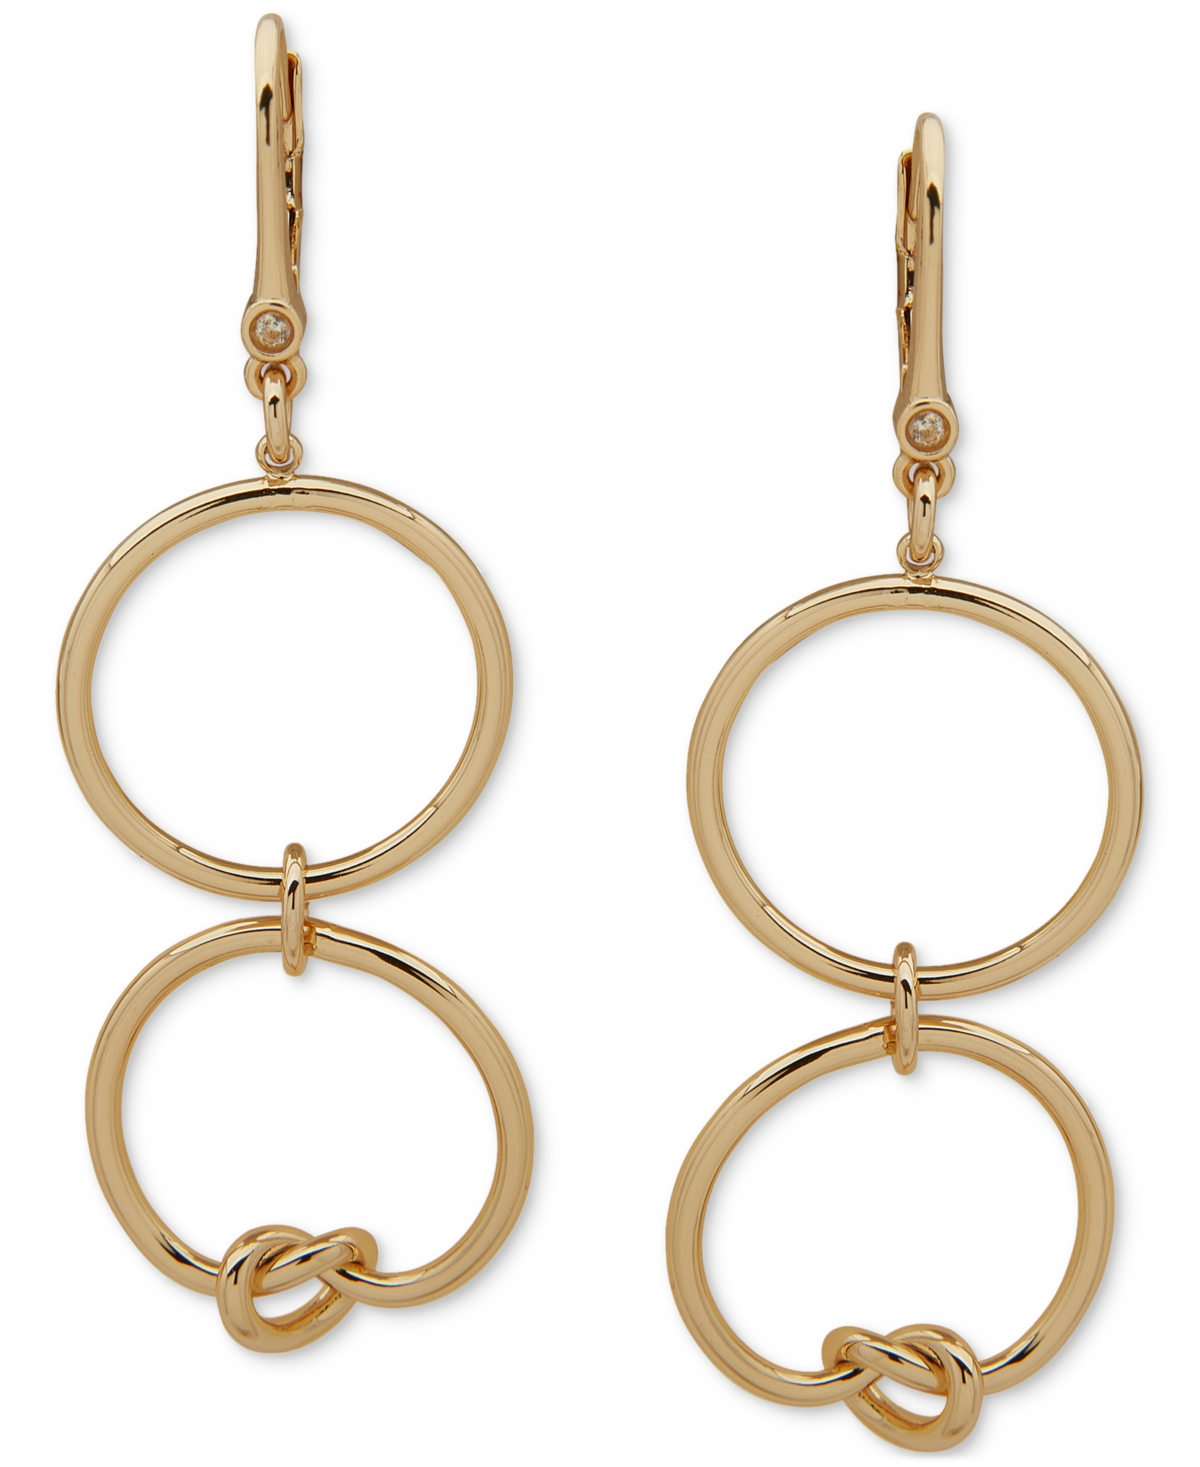 Gold-Tone Knotted Circle Double Drop Earrings - Gold